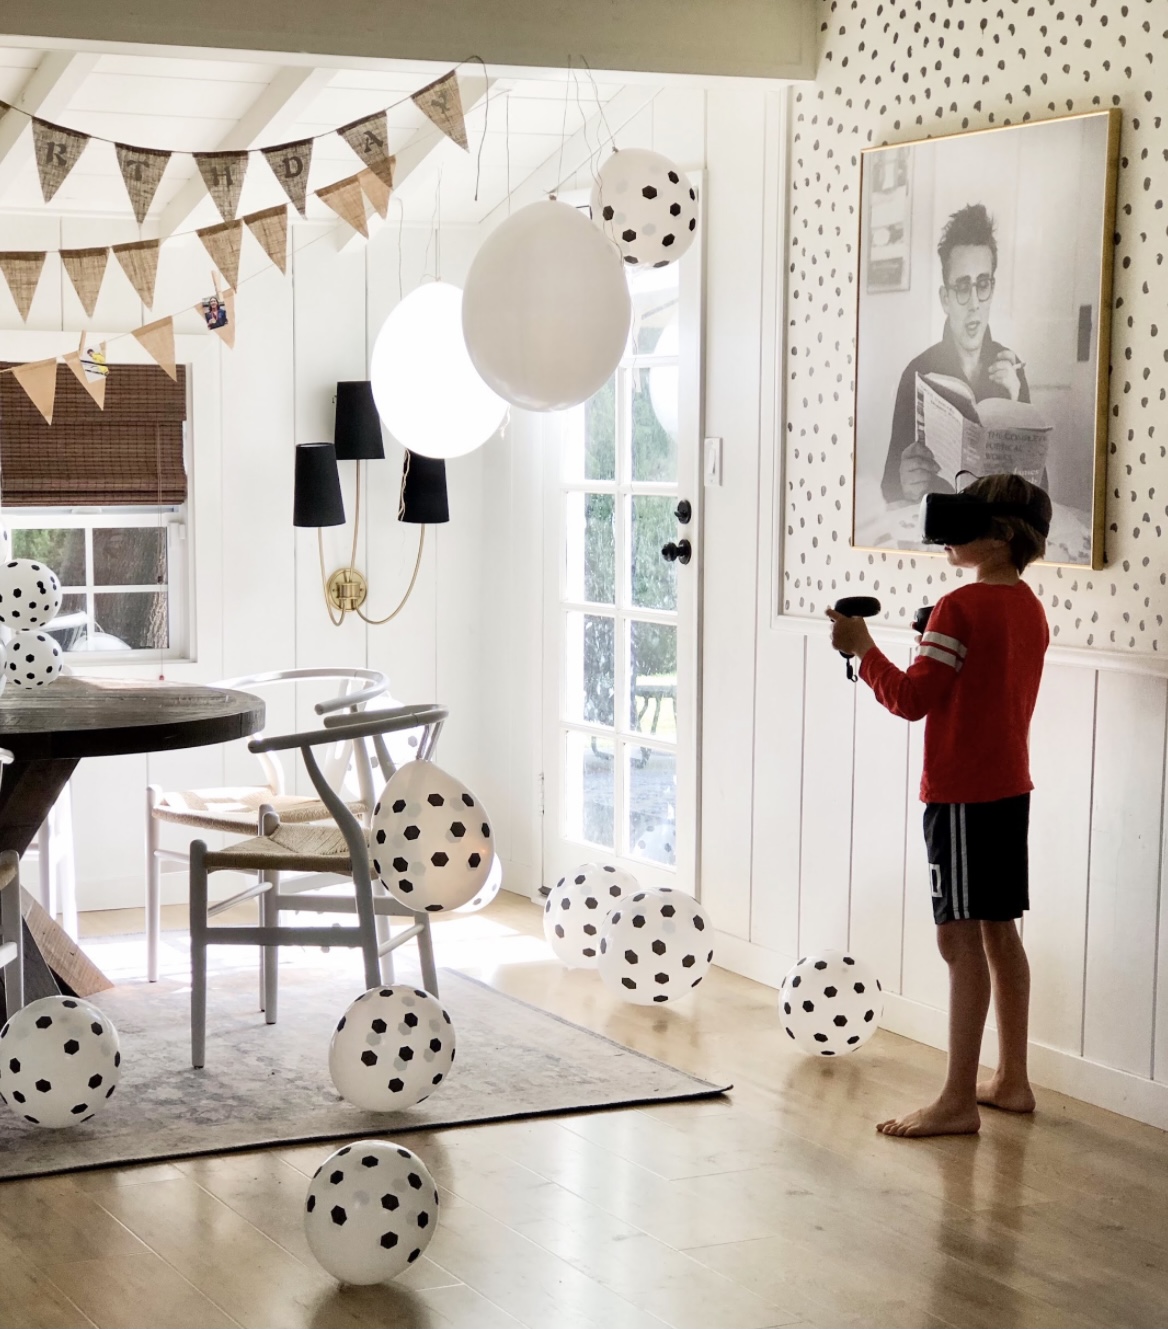 Budget friendly decorating staples, party decor ideas, birthday decor ideas, holiday decor ideas, burlap banner, latex balloons on ceiling, shiplap walls, swiss coffee white paint, polka dot ceiling, vaulted ceiling, shiplap ceiling, party decor ideas